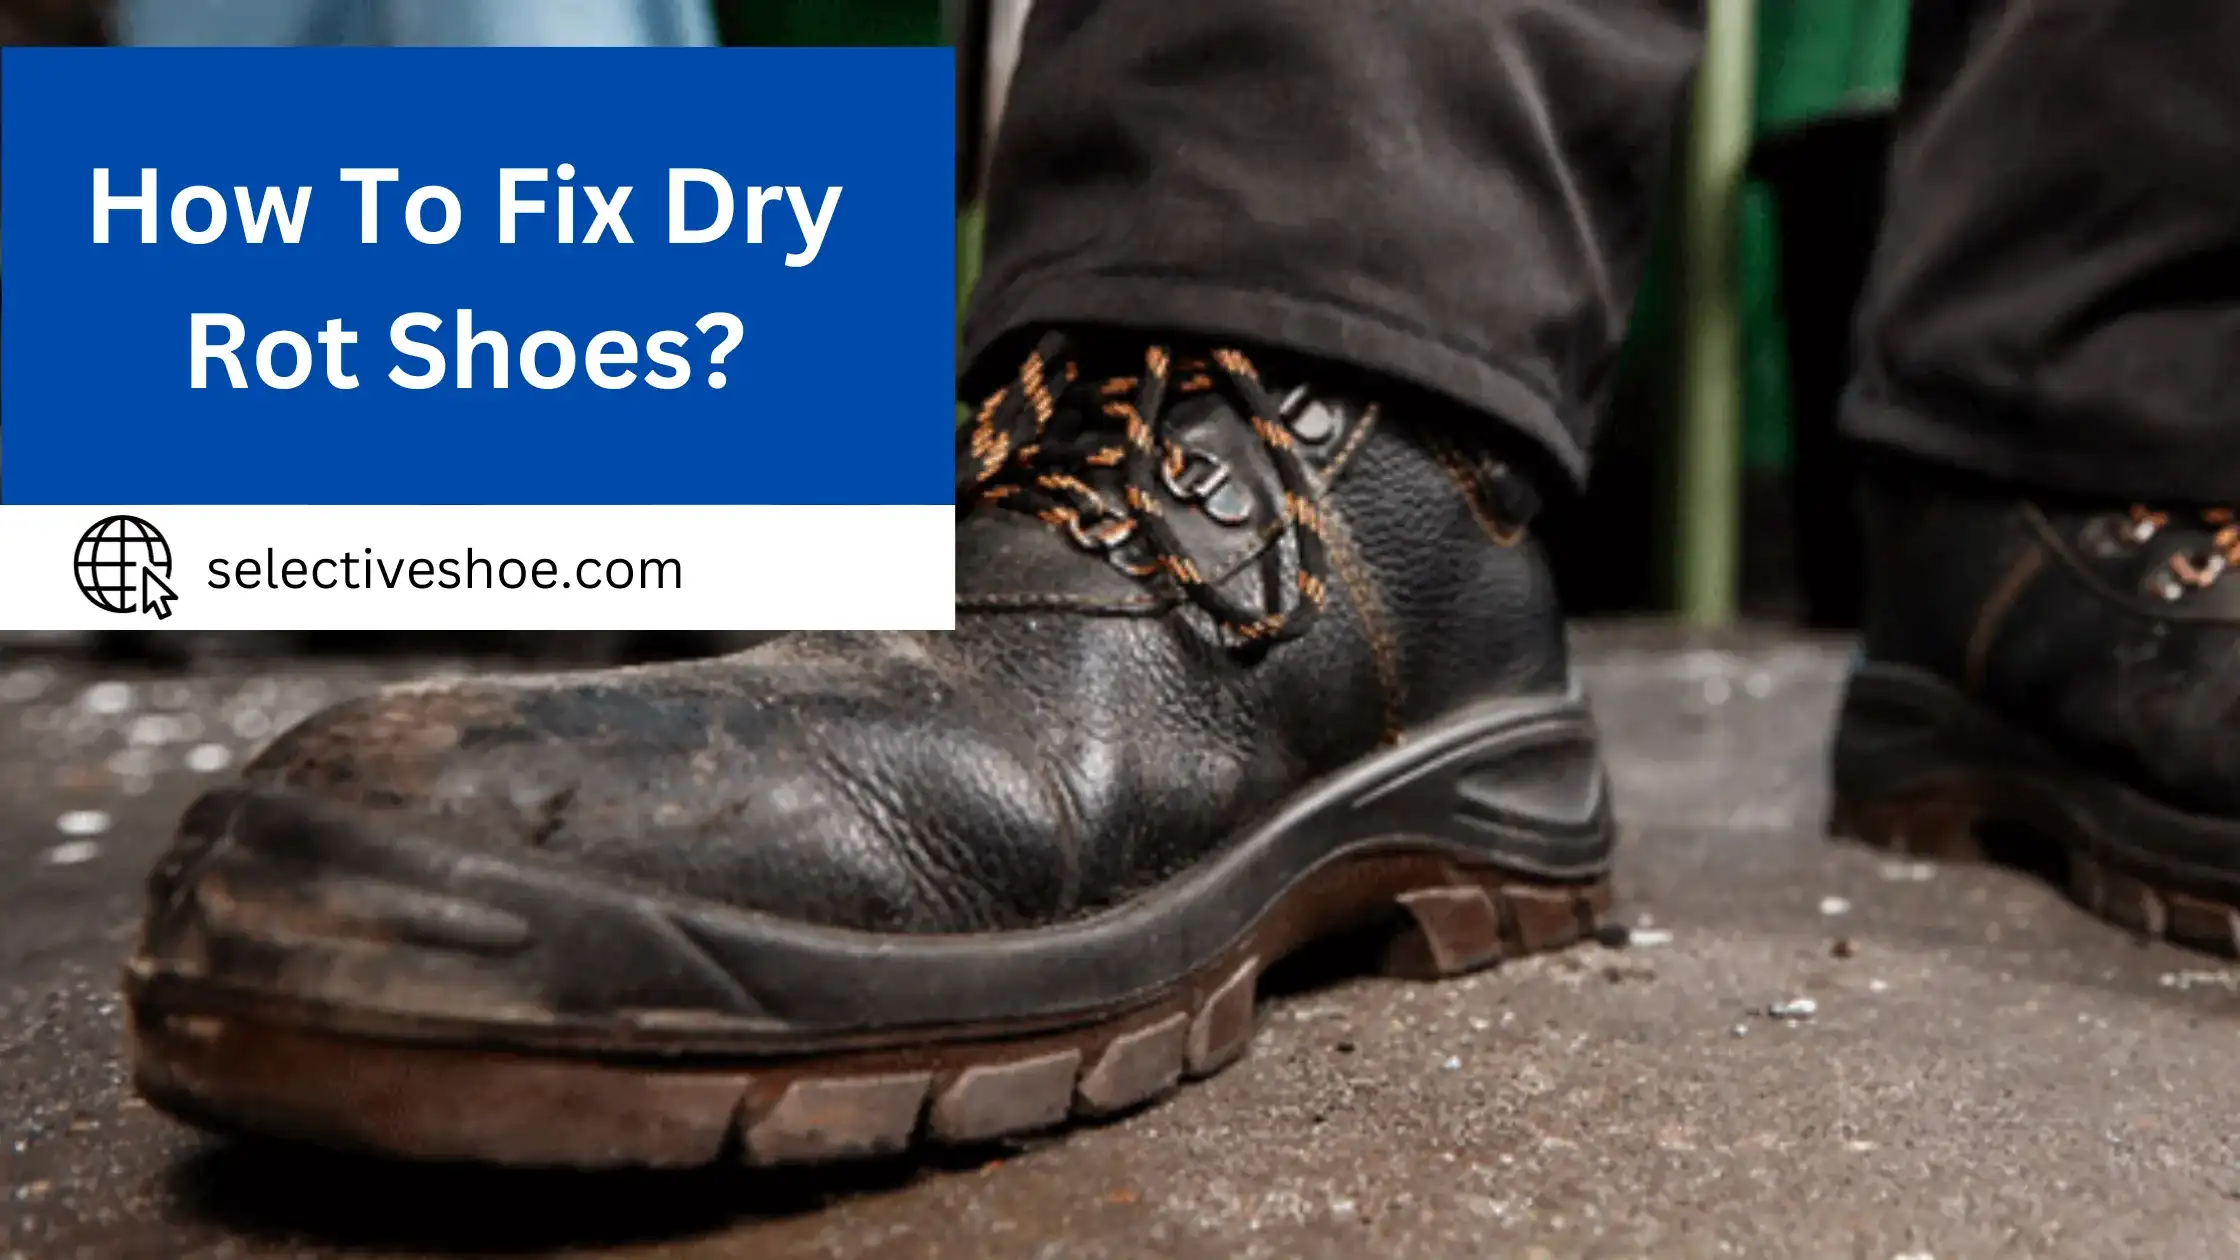 How To Fix Dry Rot Shoes? You Should Need To Know